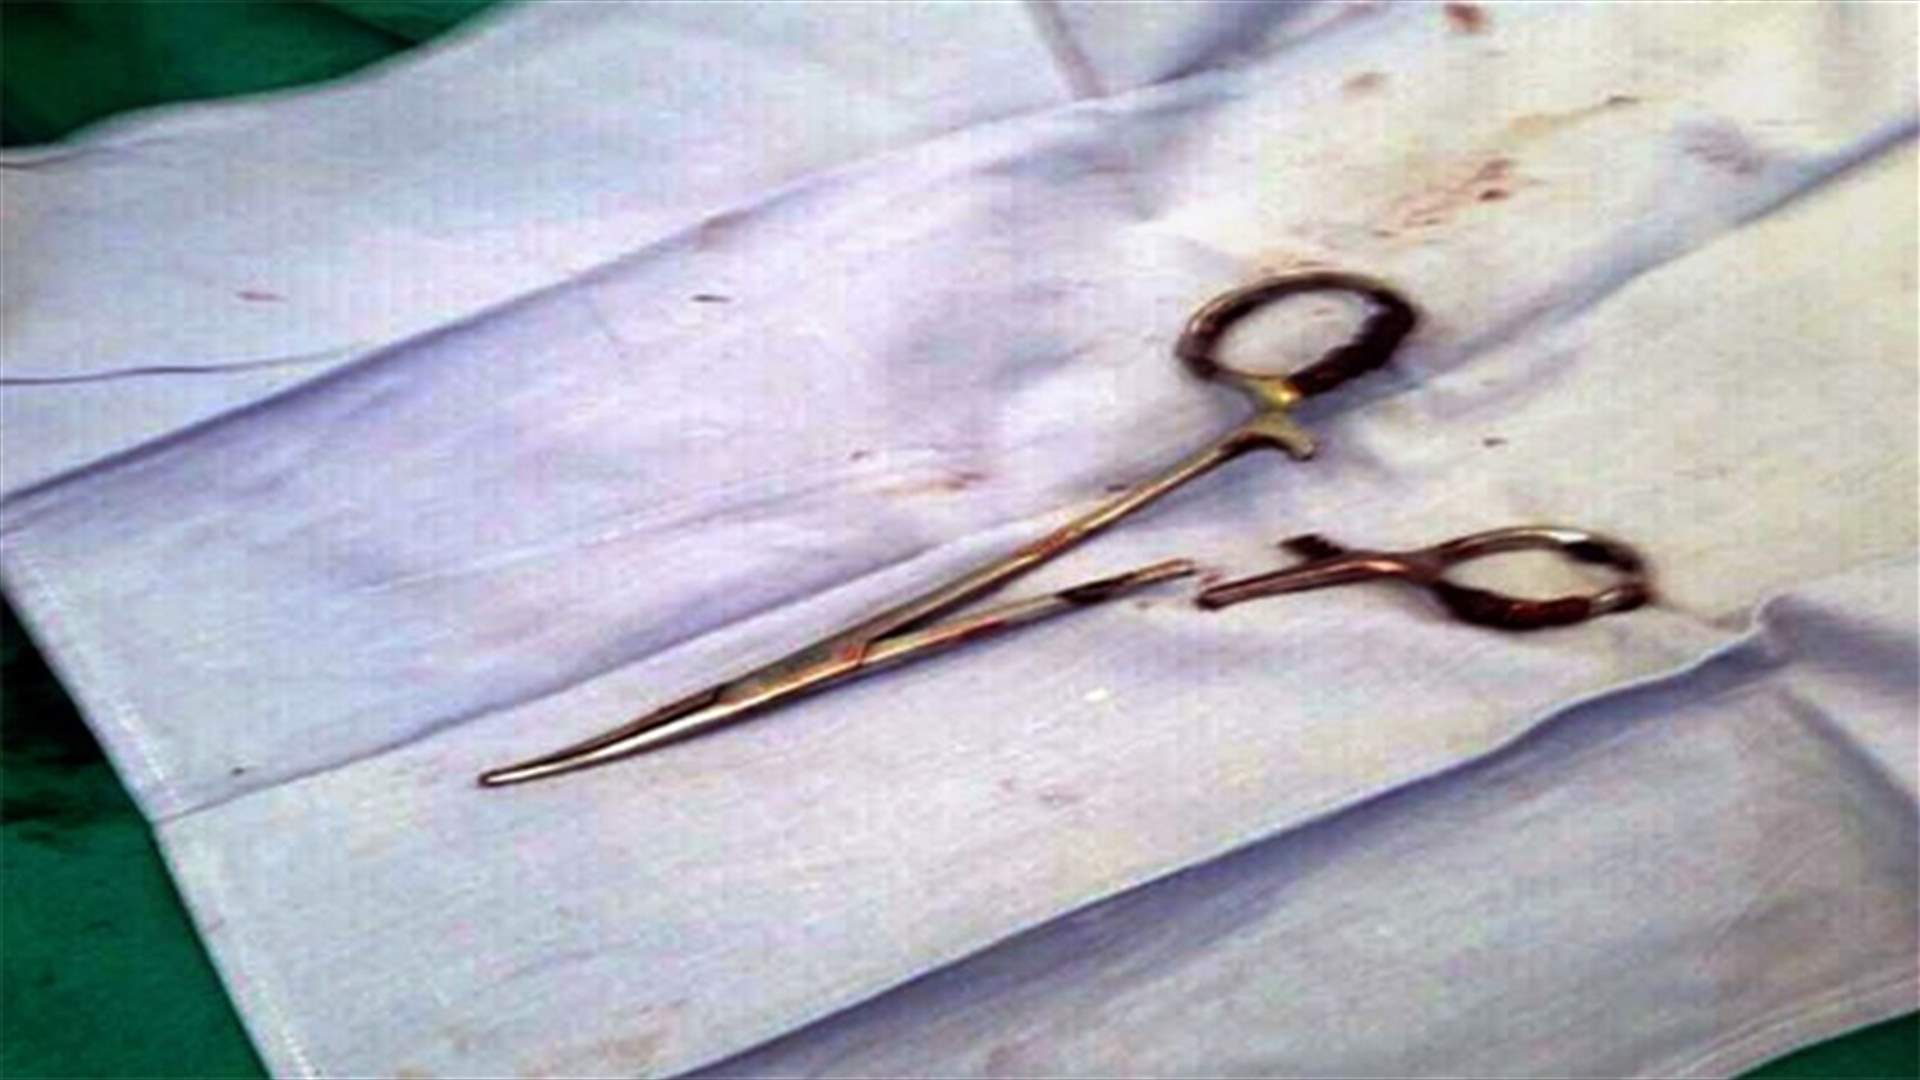 Man Has Scissors Removed From Him After 18-Year Stomach Ache